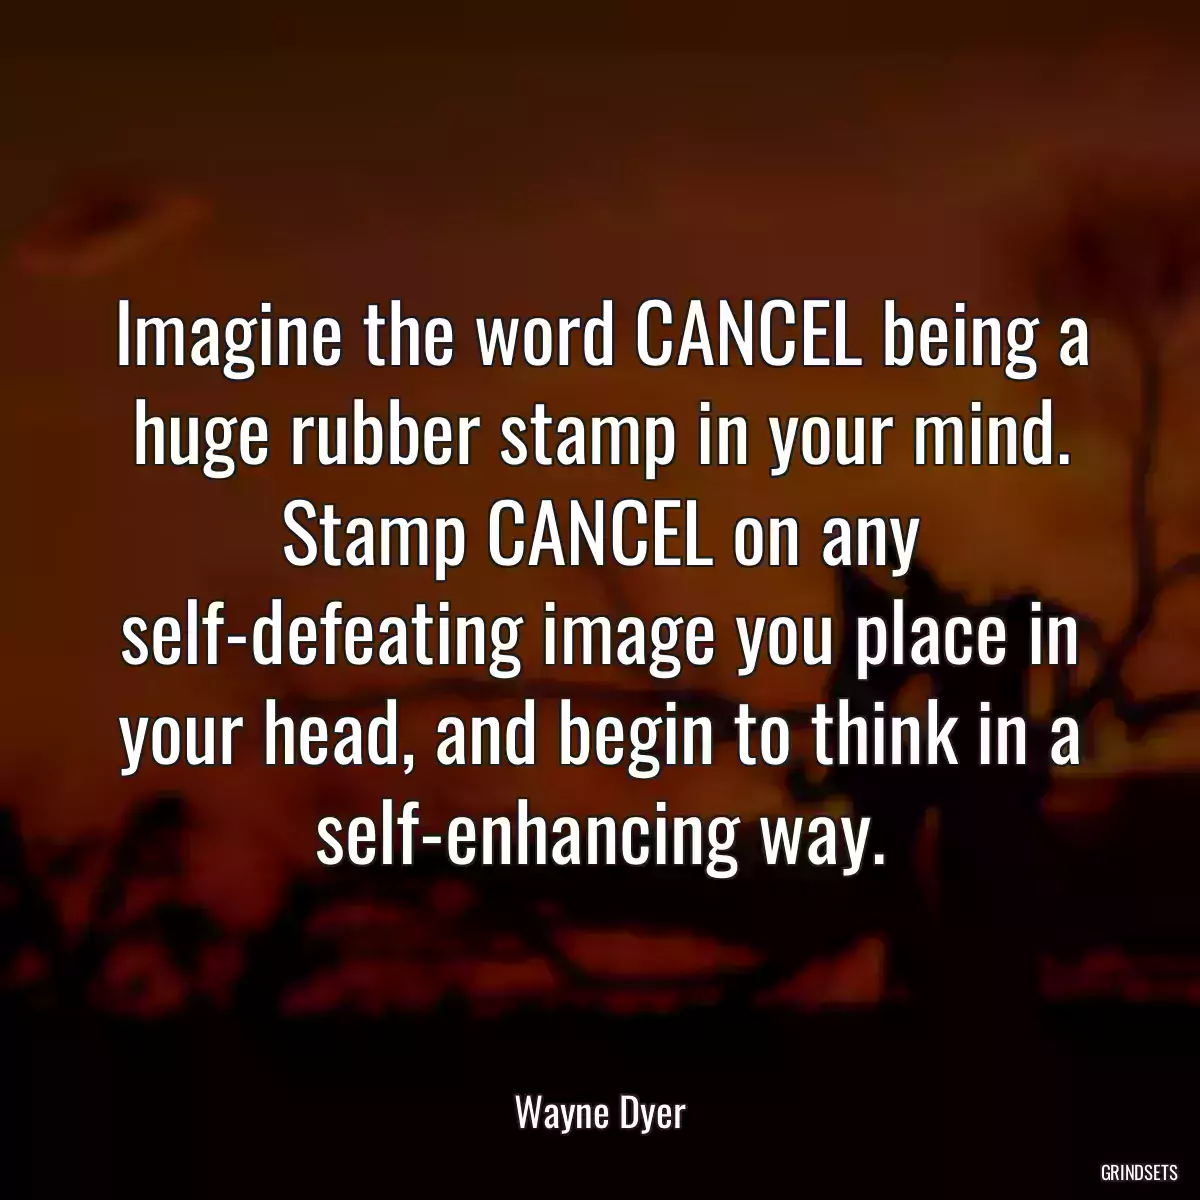 Imagine the word CANCEL being a huge rubber stamp in your mind. Stamp CANCEL on any self-defeating image you place in your head, and begin to think in a self-enhancing way.